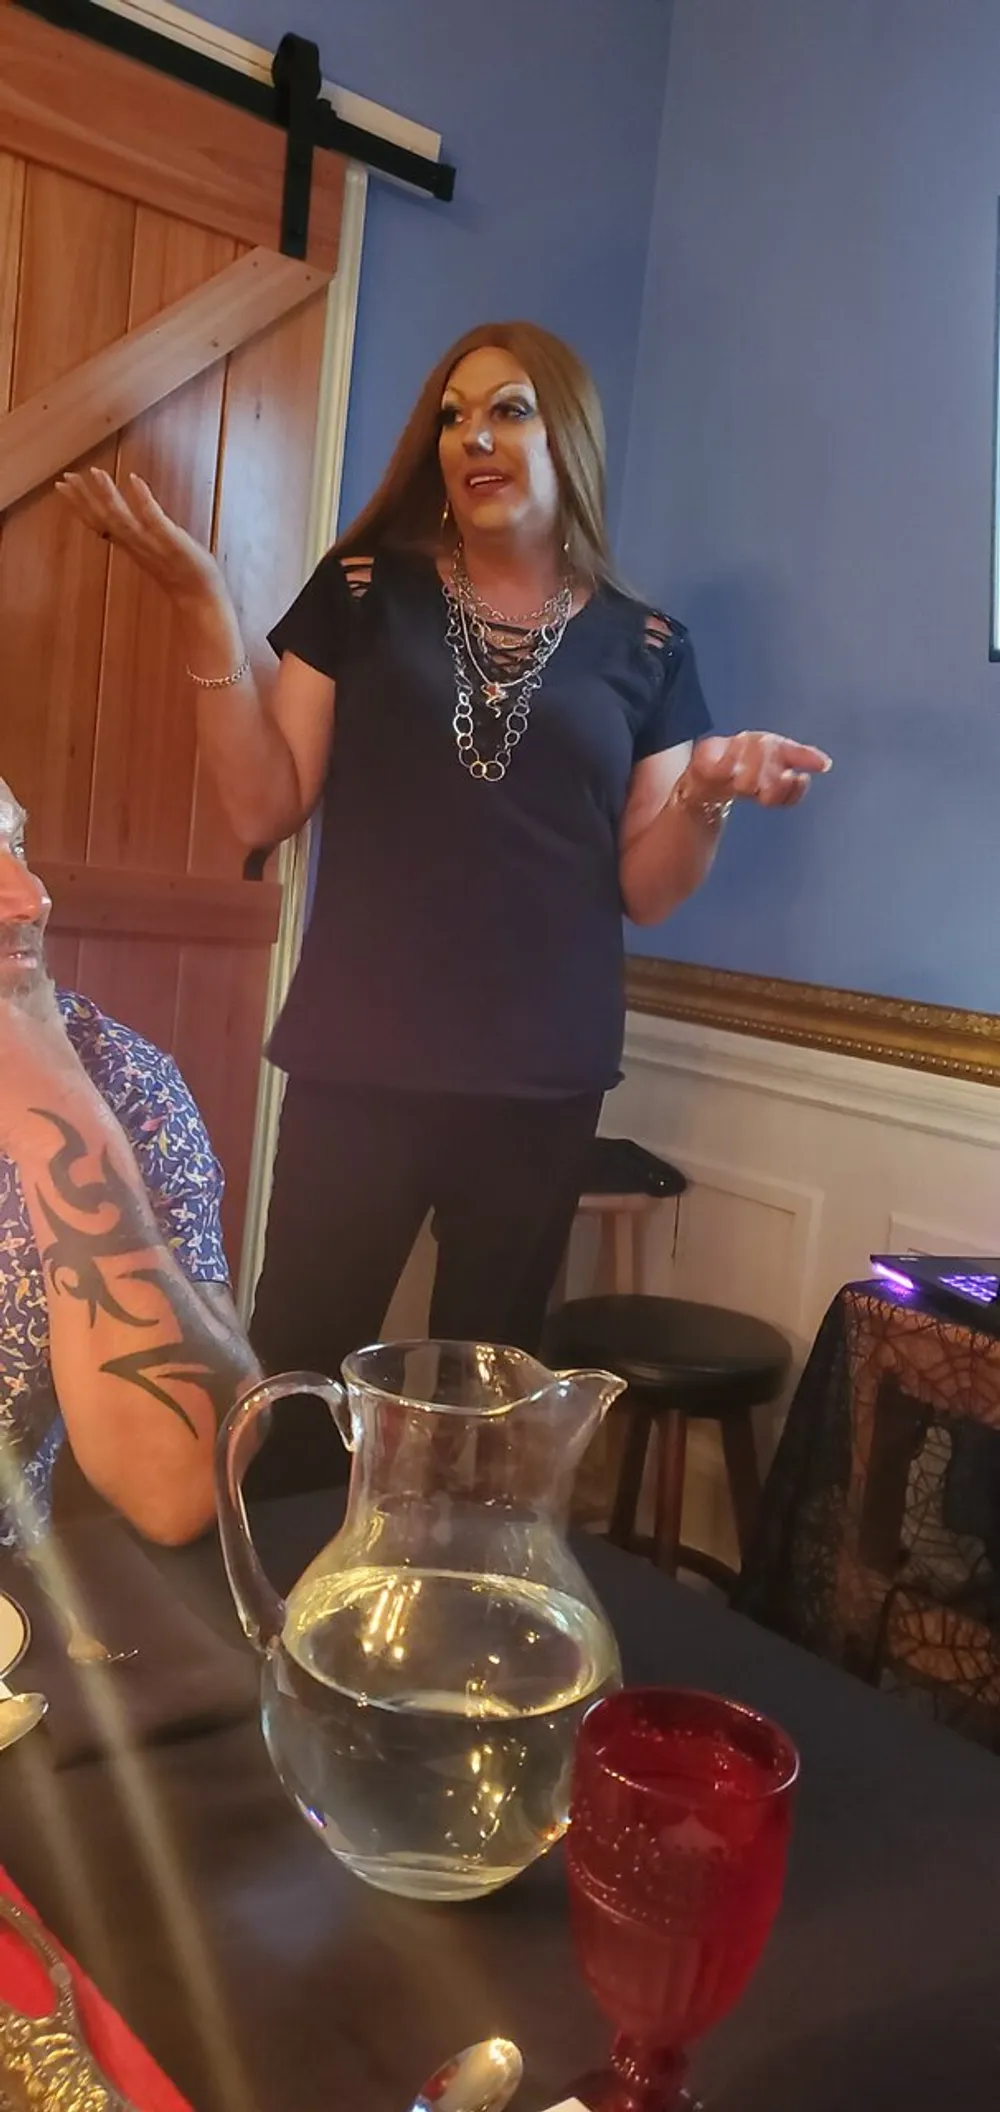 A person is standing and gesturing while speaking in a room with a water pitcher and red glass on a table and part of another person with a tattoo is visible in the foreground